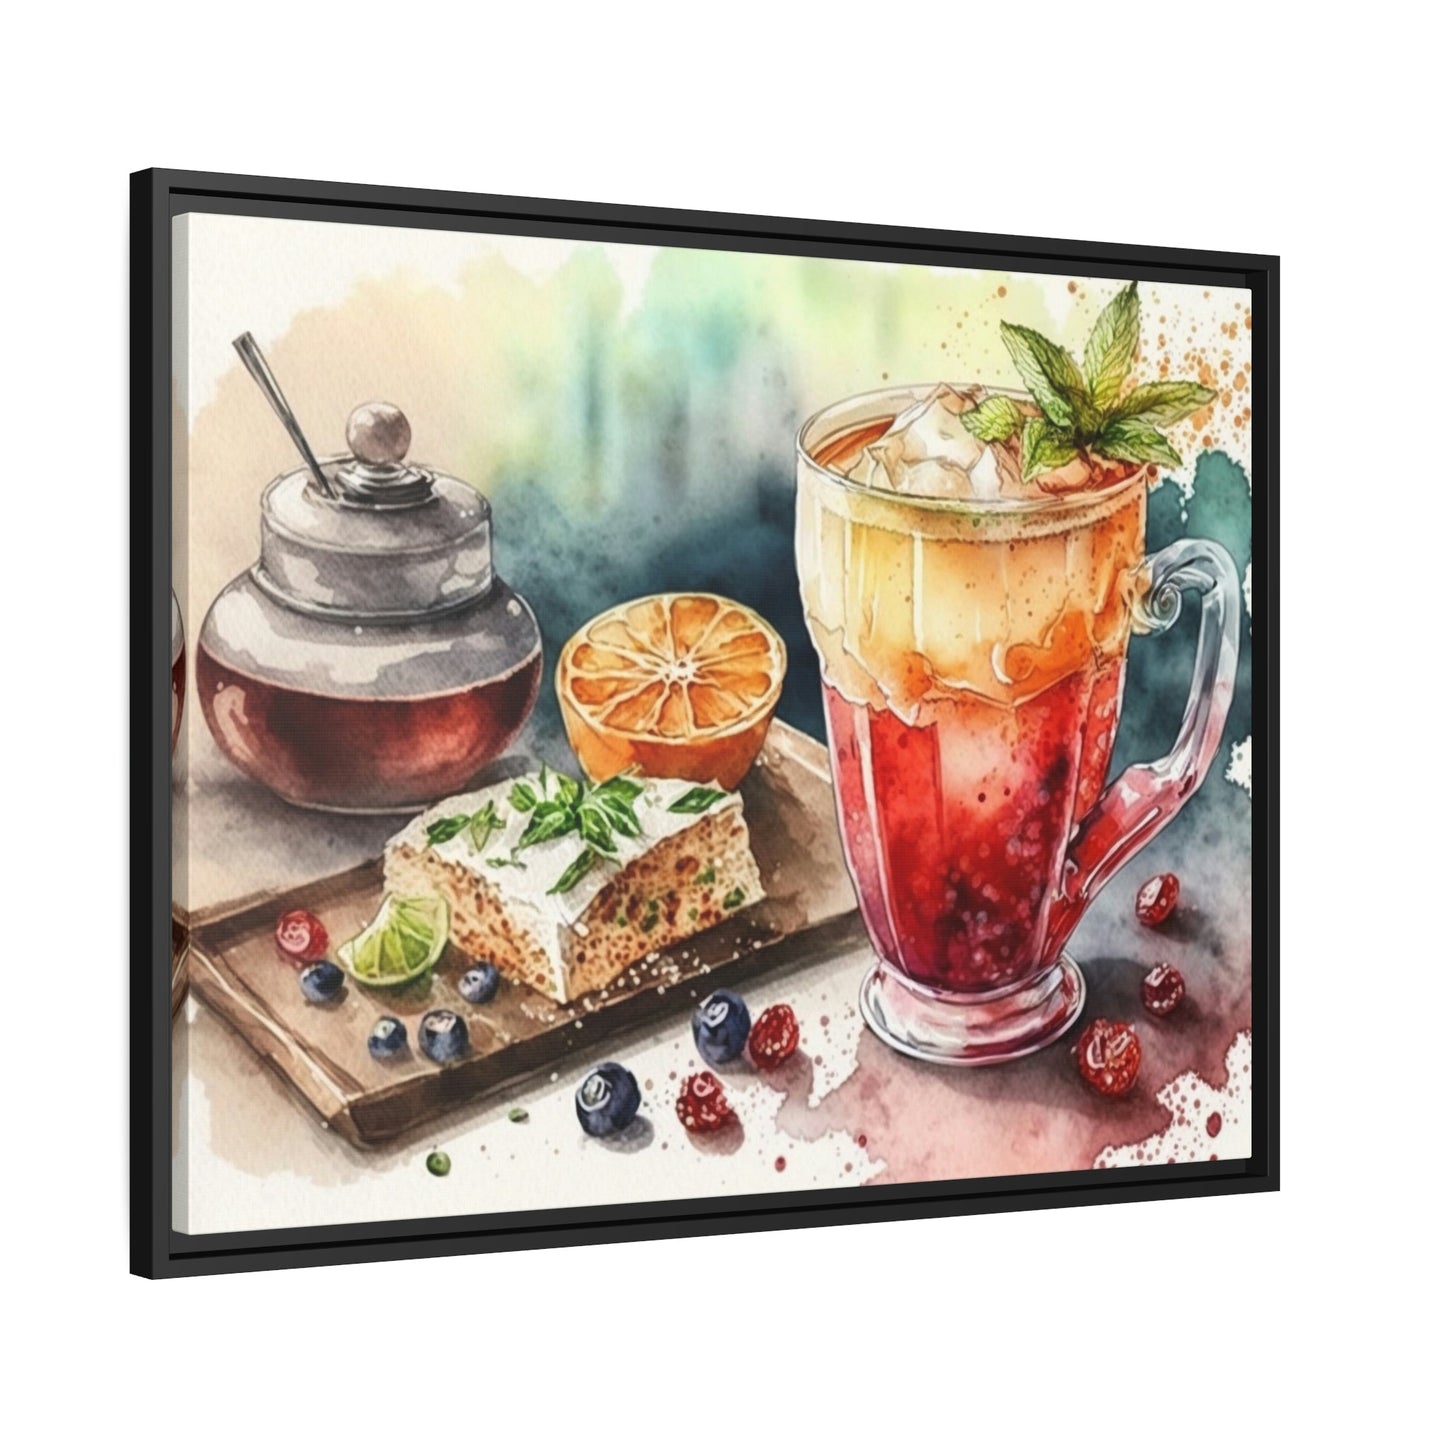 Food & Drink: Vibrant Framed Posters to Liven Up Your Space